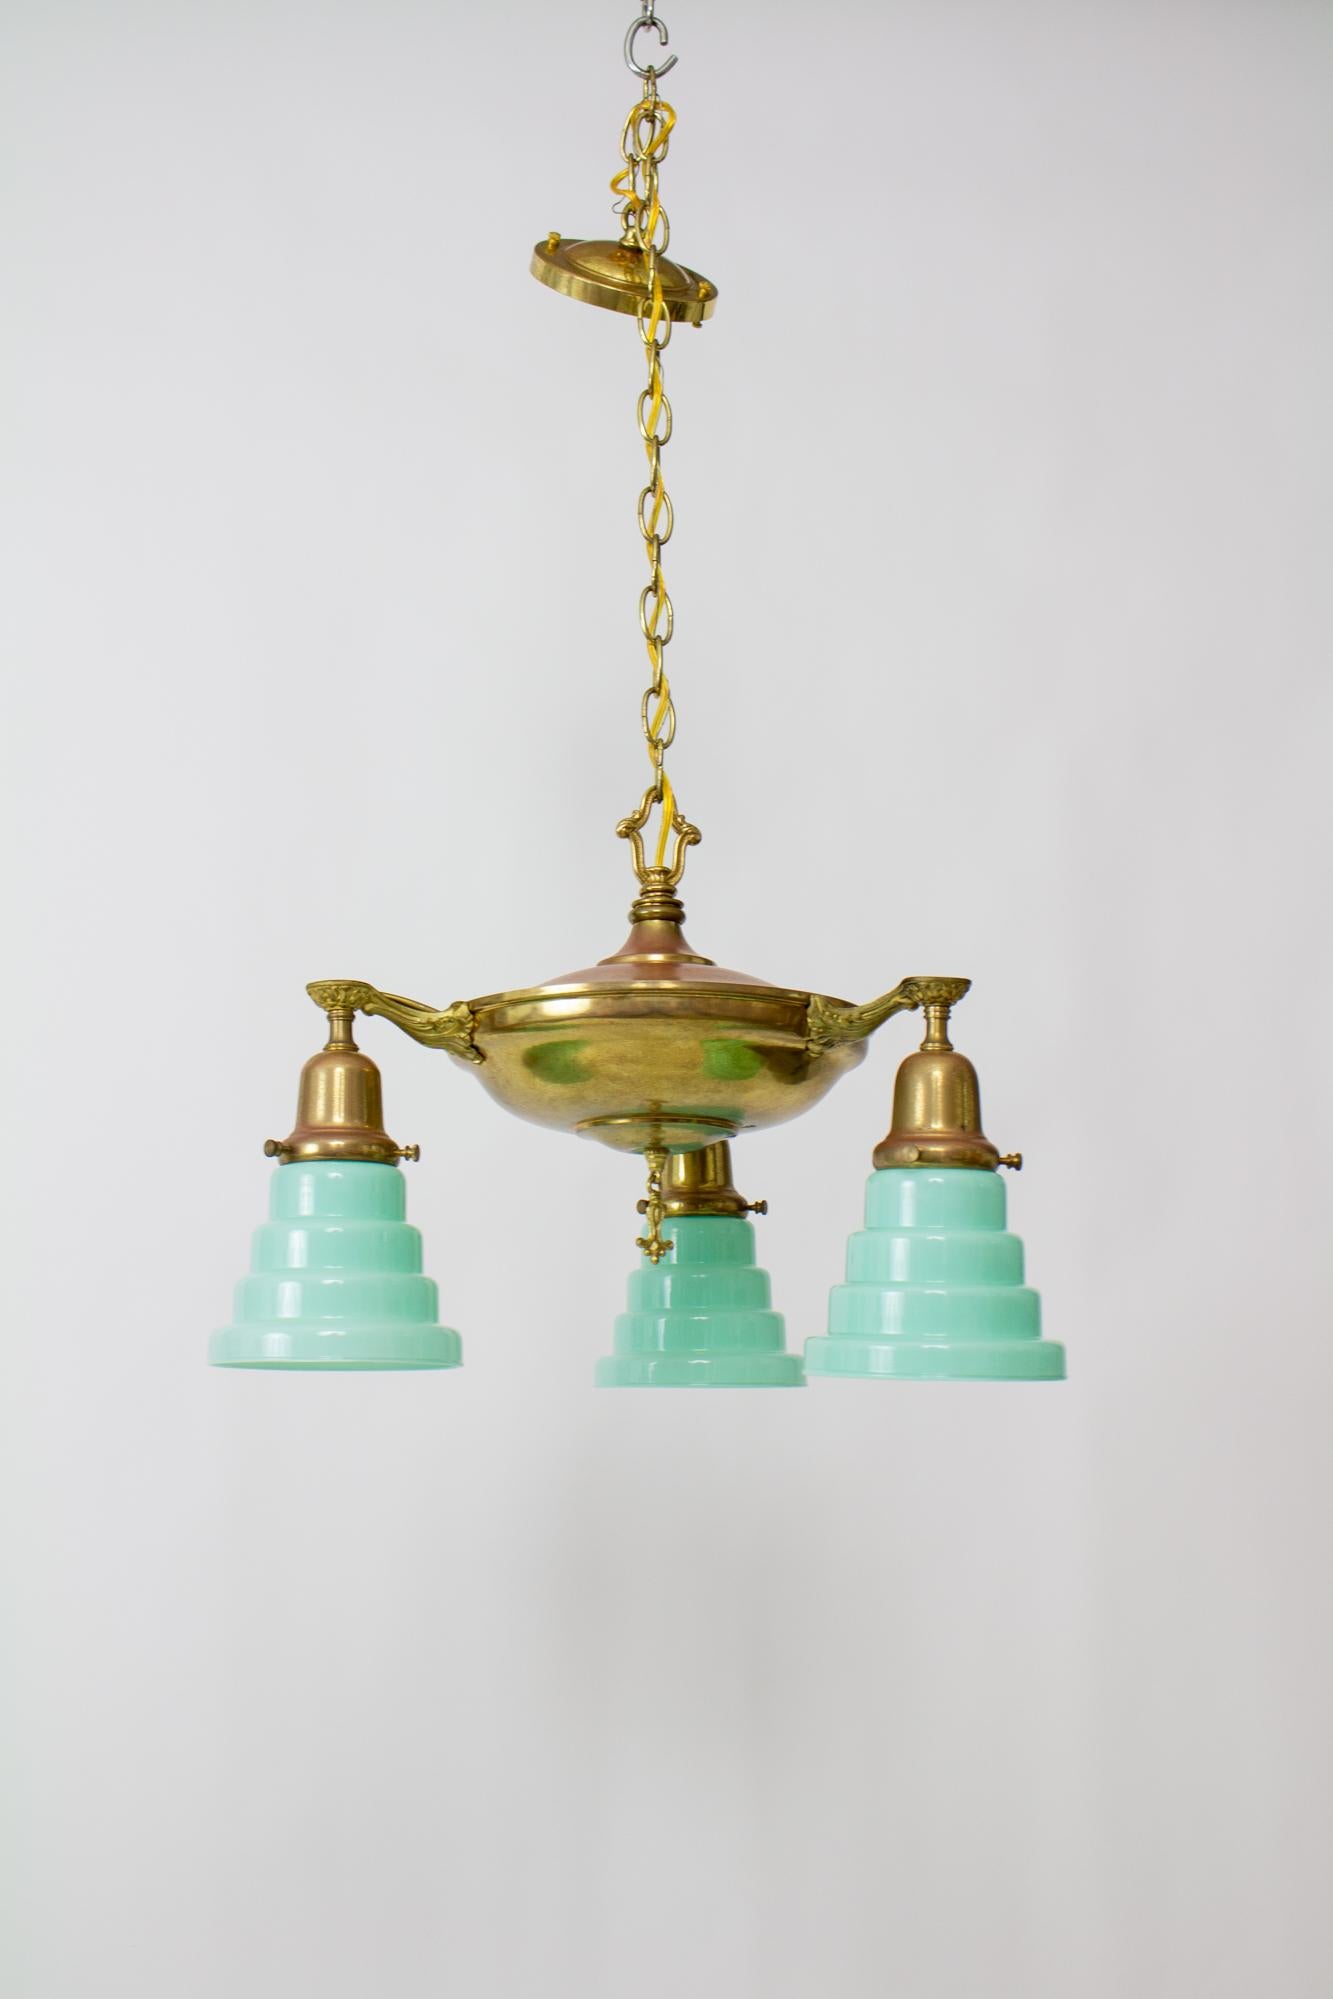 Early 20th century pan light with art deco glass in seafoam green. Classic American three light pan light in an aged brass, with art deco style glass from Vianne of France. An informal fixture with a pop of color. Rewired with chain and canopy.